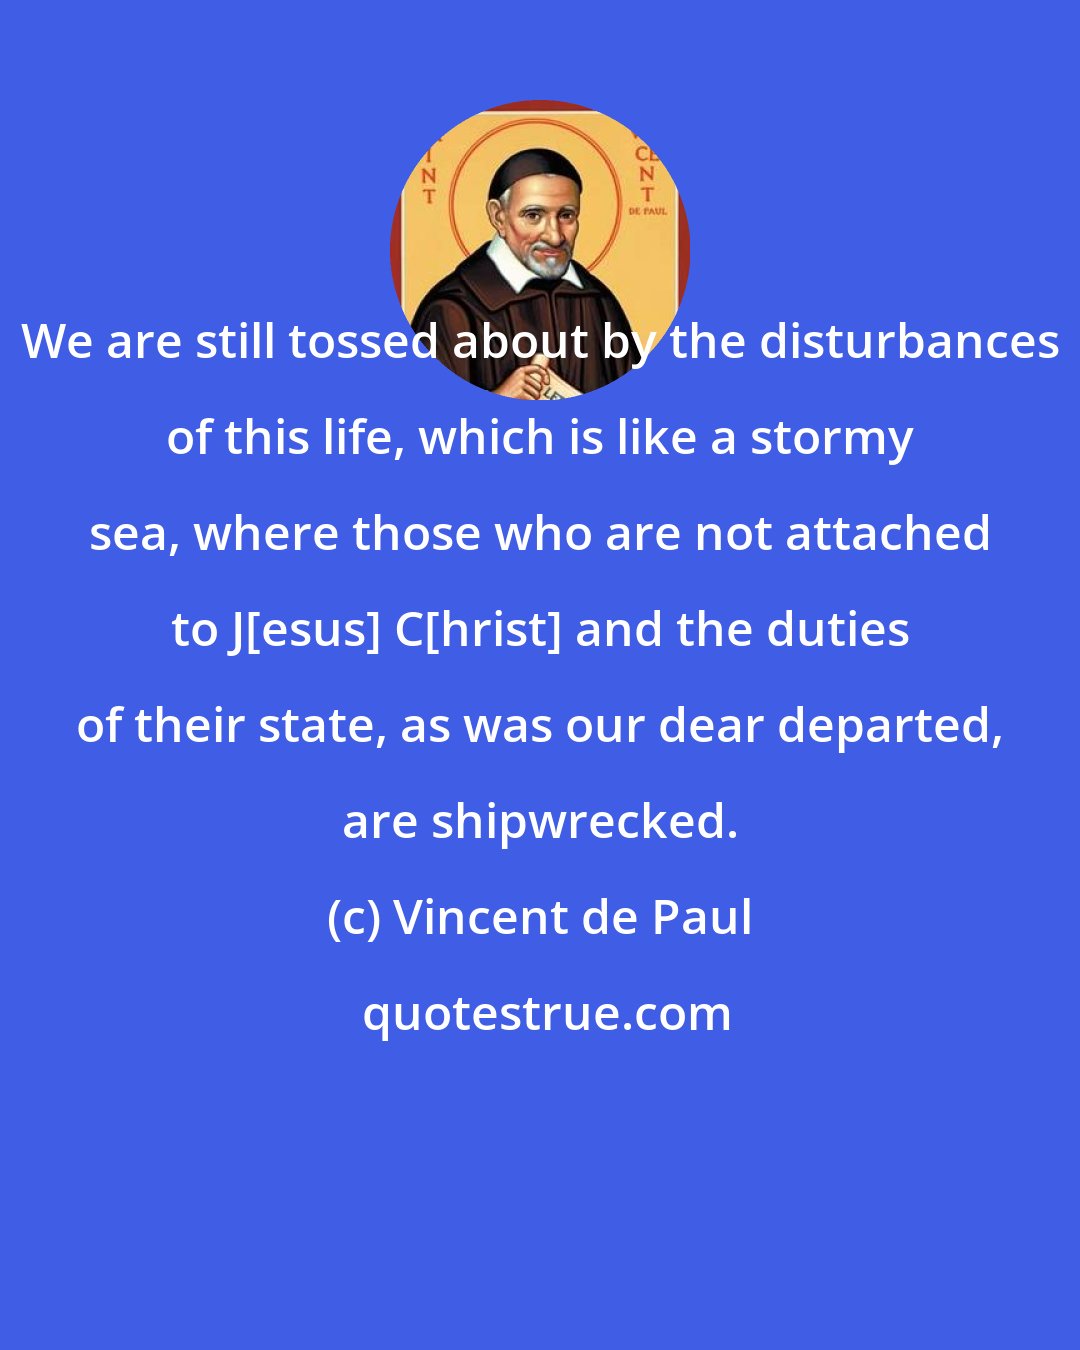 Vincent de Paul: We are still tossed about by the disturbances of this life, which is like a stormy sea, where those who are not attached to J[esus] C[hrist] and the duties of their state, as was our dear departed, are shipwrecked.